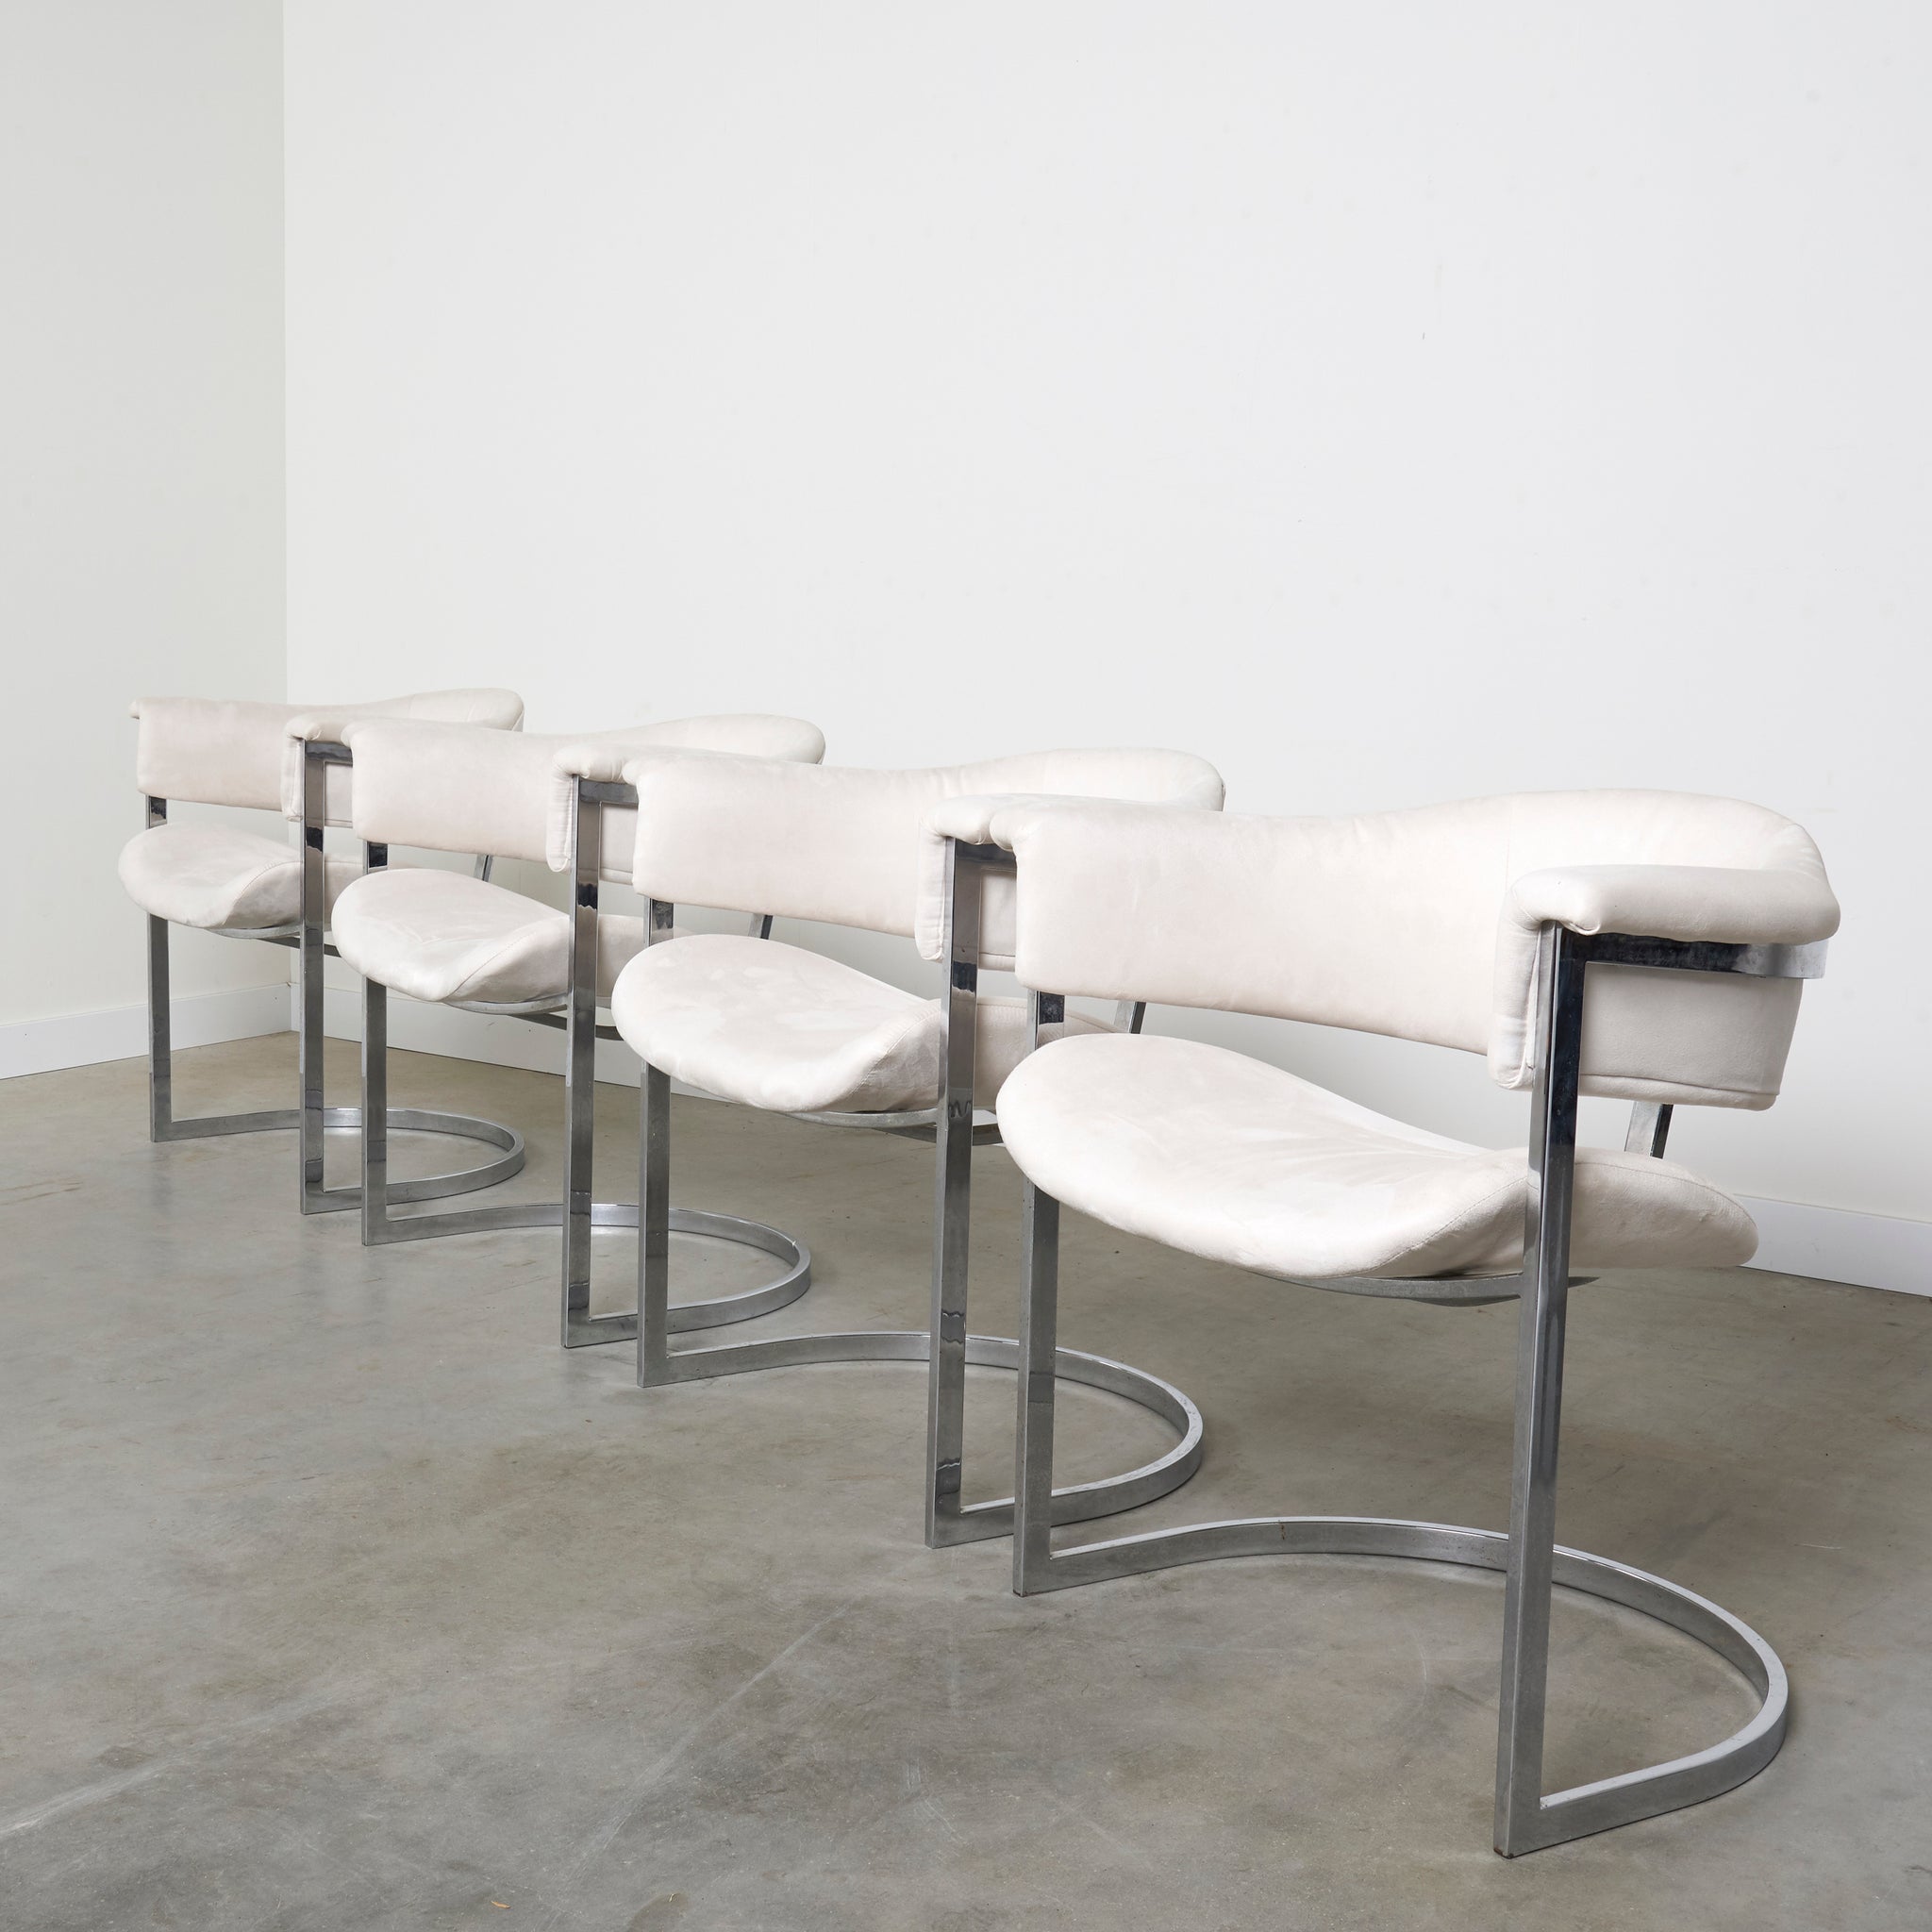 Set of 4 dining chairs by Vittorio Introini, Italy 1970s